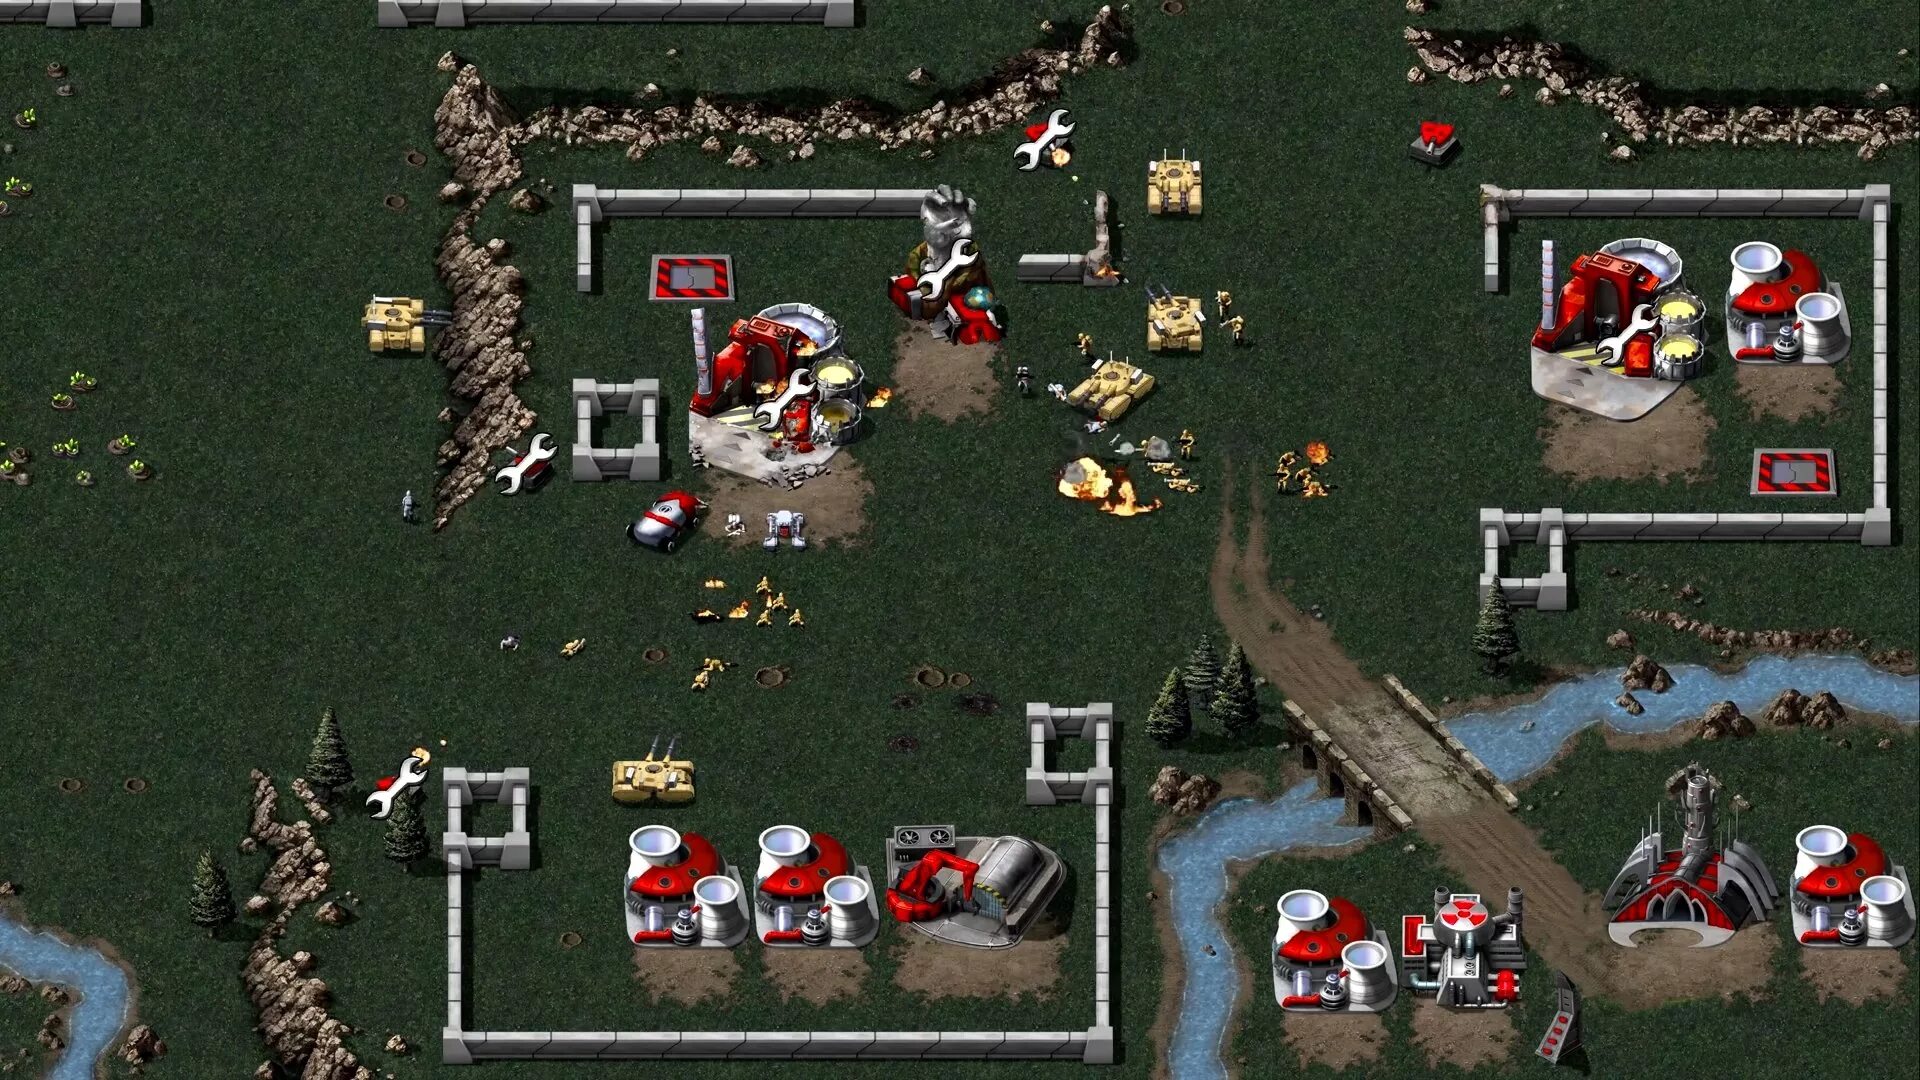 Command Conquer Remastered collection 2020. Red Alert 2020 Remastered. Command Conquer Red Alert 1 Remastered. Command Conquer 2 Remastered.